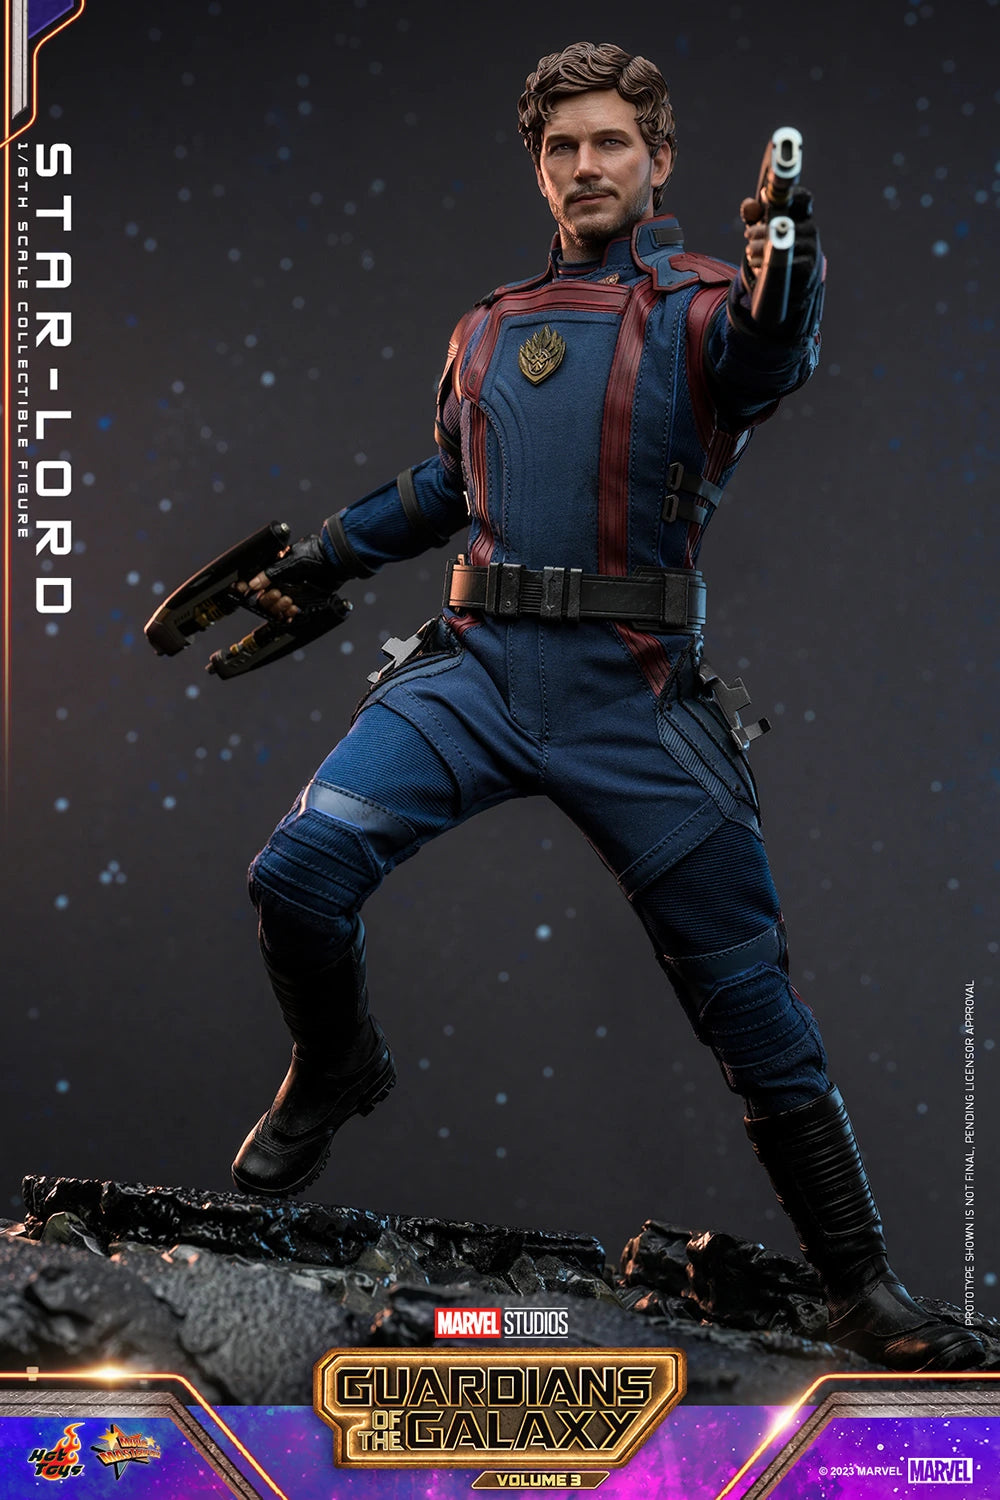 Hot Toys Guardians of the Galaxy Vol. 3 Star-Lord 1/6th Scale Figure